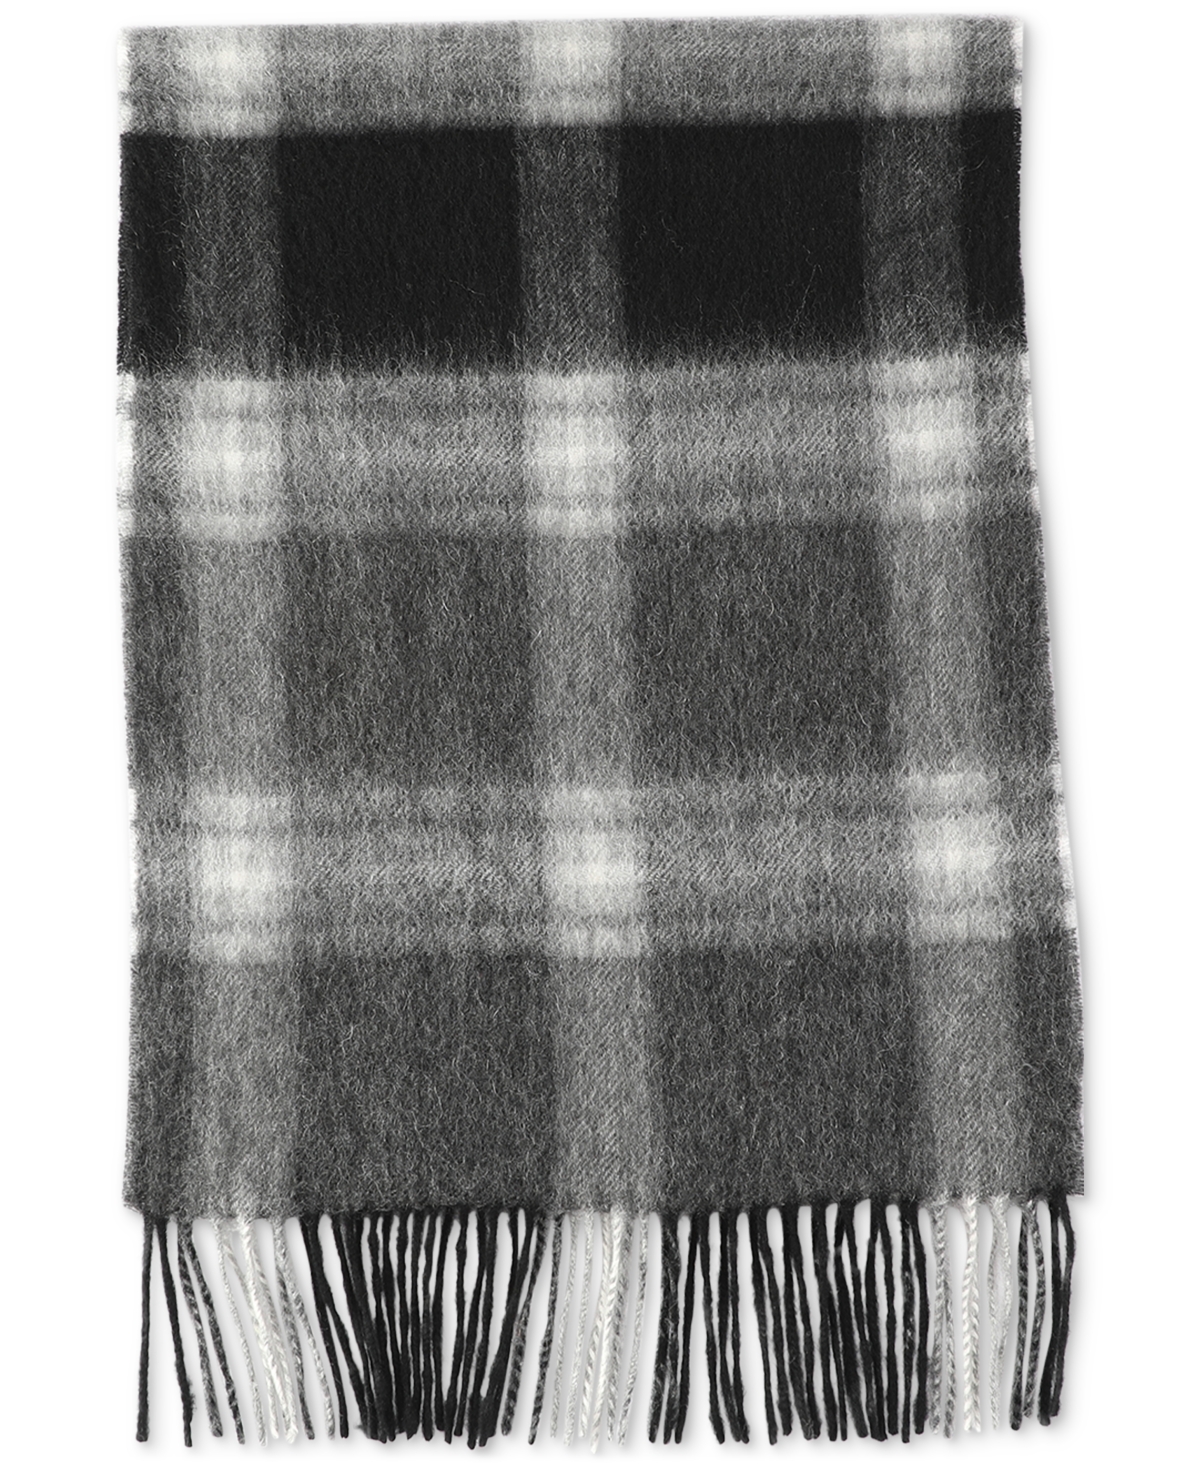 Men's Maxwell Plaid Cashmere Scarf, Created for Macy's - Black/grey